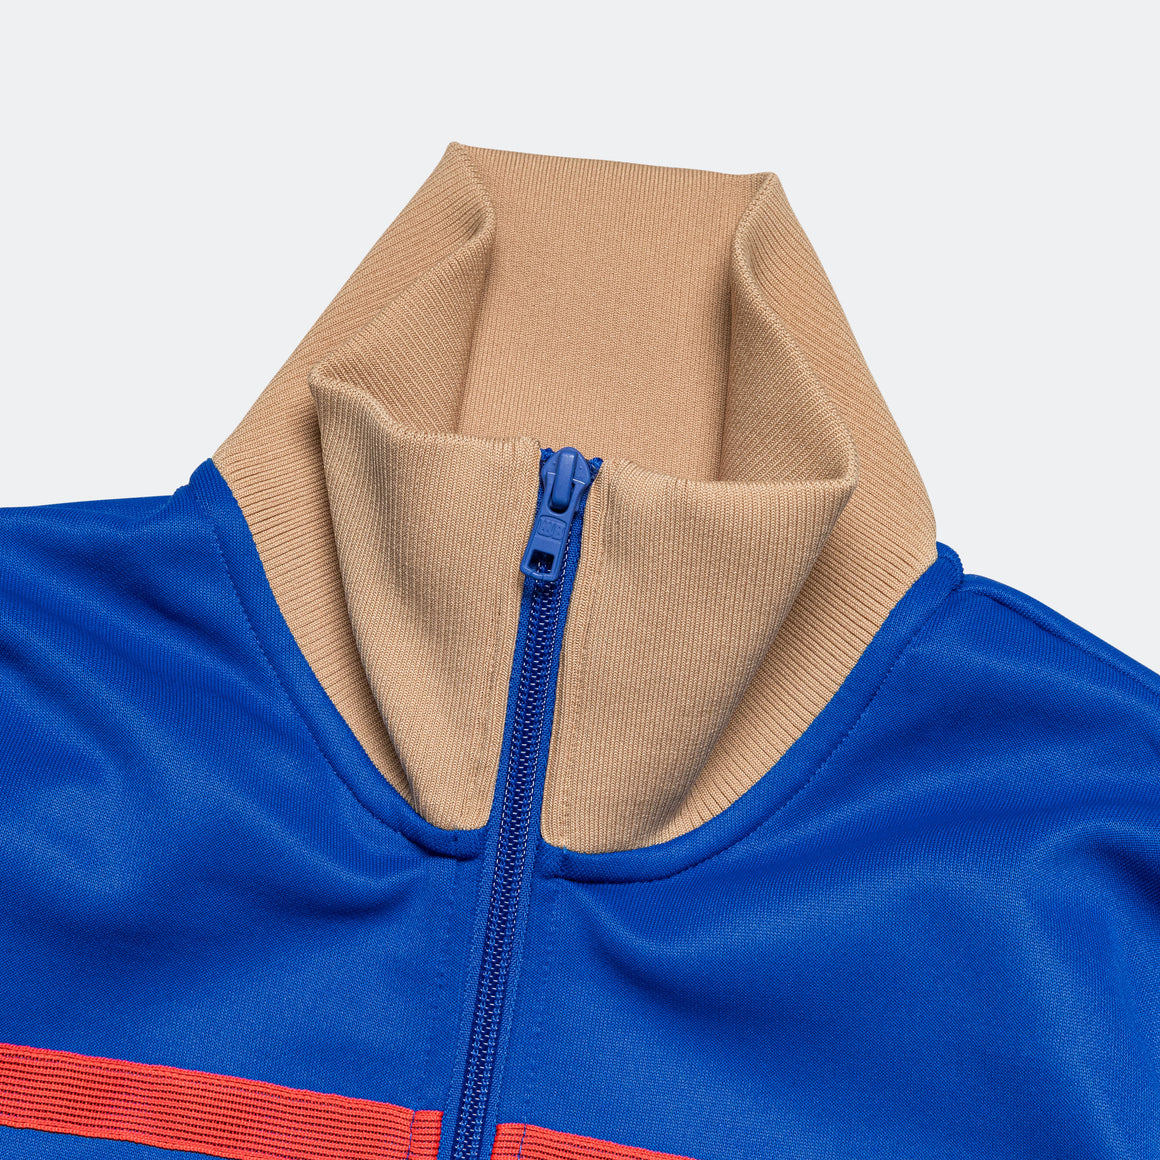 adidas - Jersey Track Top x Wales Bonner - Royal Blue - UP THERE